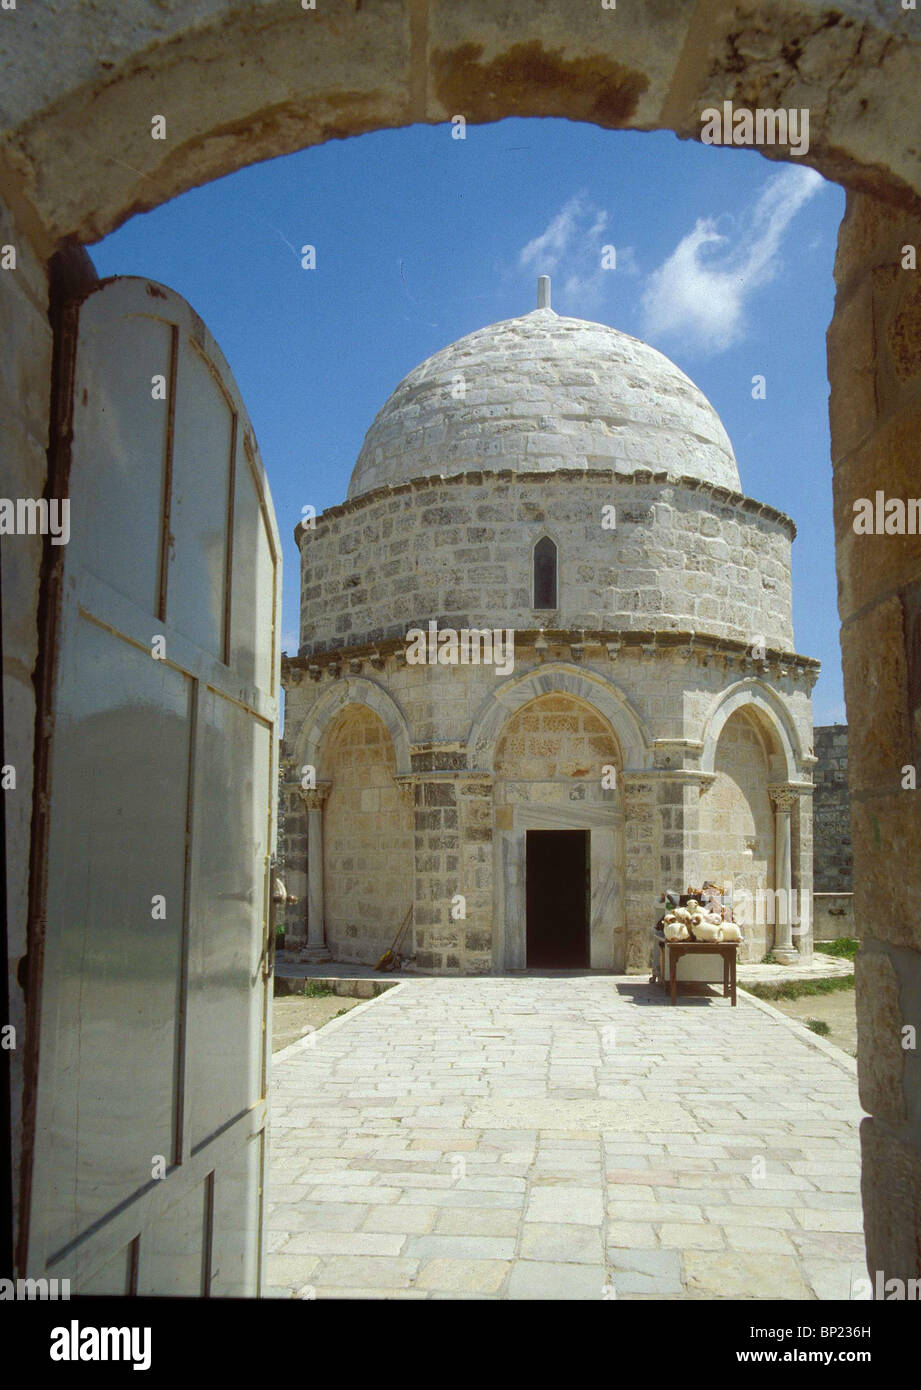 133. THE CHAPEL OF ASCENSION ON THE MT. OF OLIVES, IT WAS BUILT BY THE CRUSADERS IN THE 12TH. C. Stock Photo